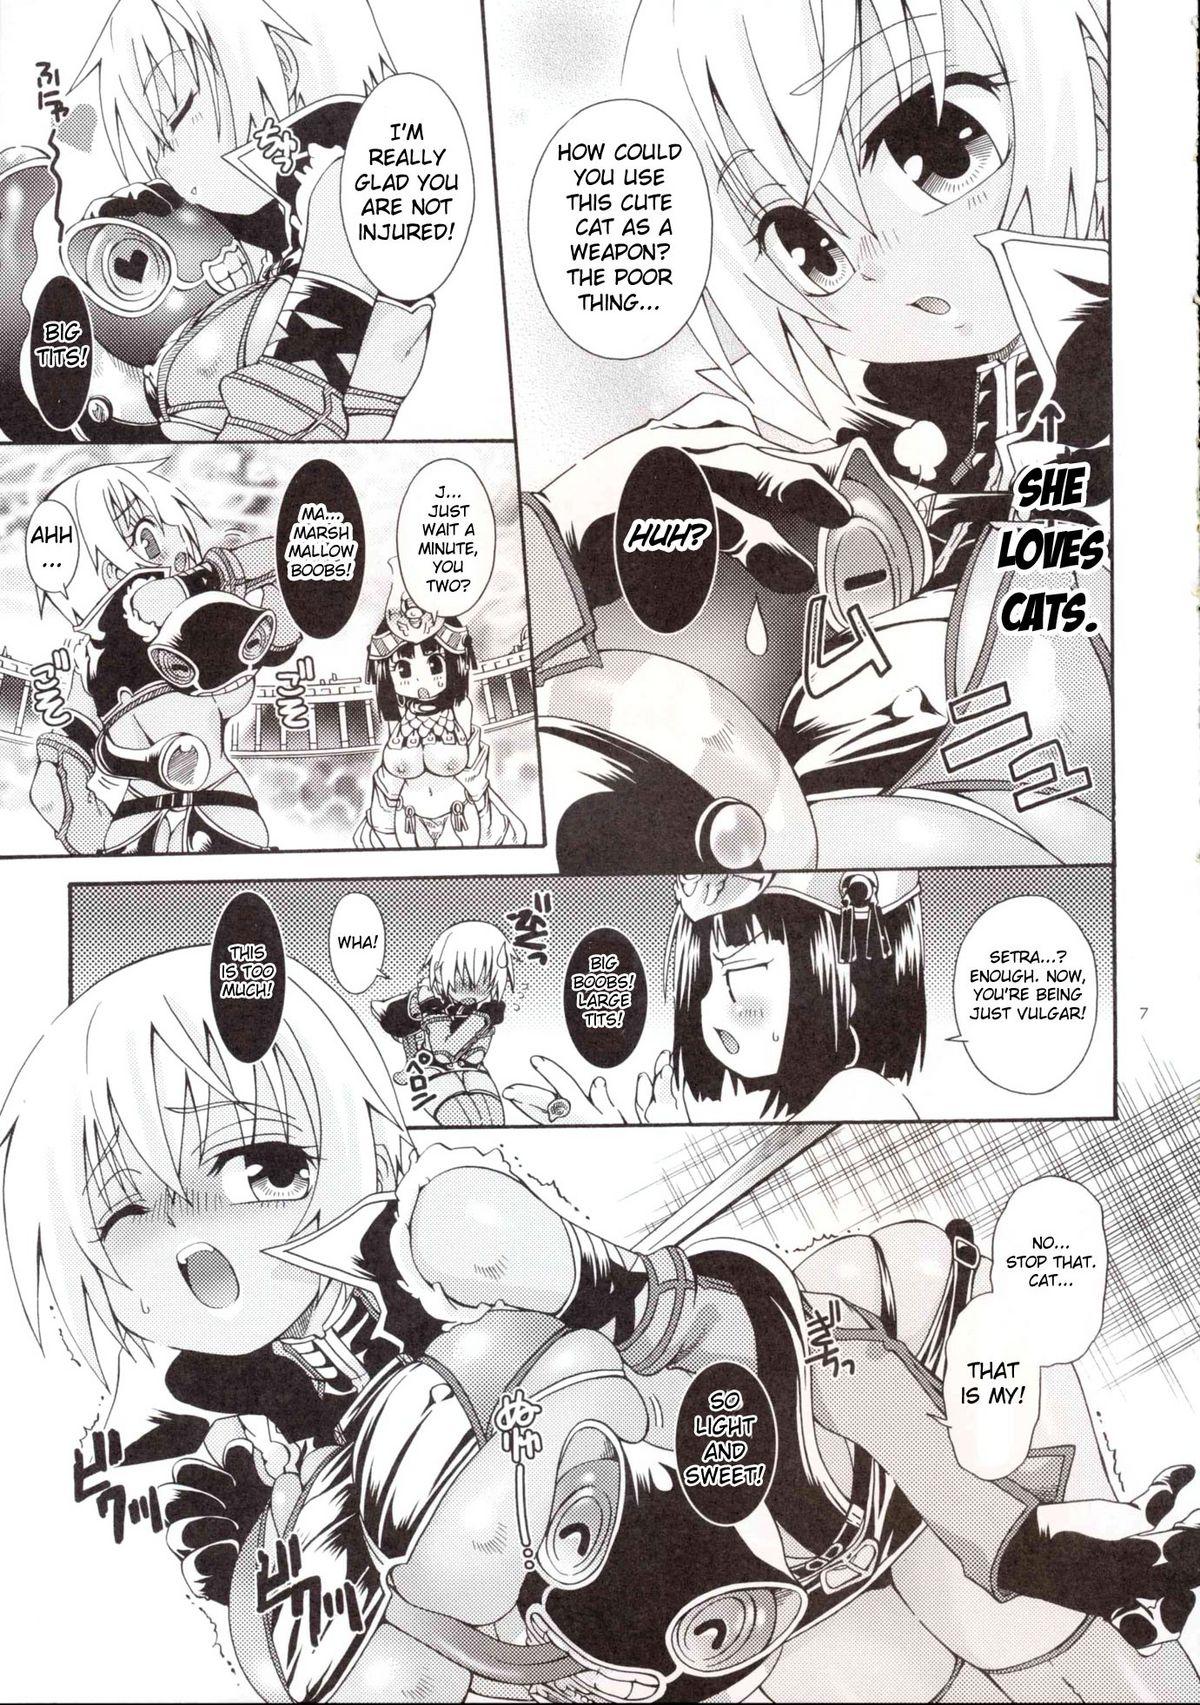 Closeup Cat Fight Over Drive - Queens blade Transex - Page 6